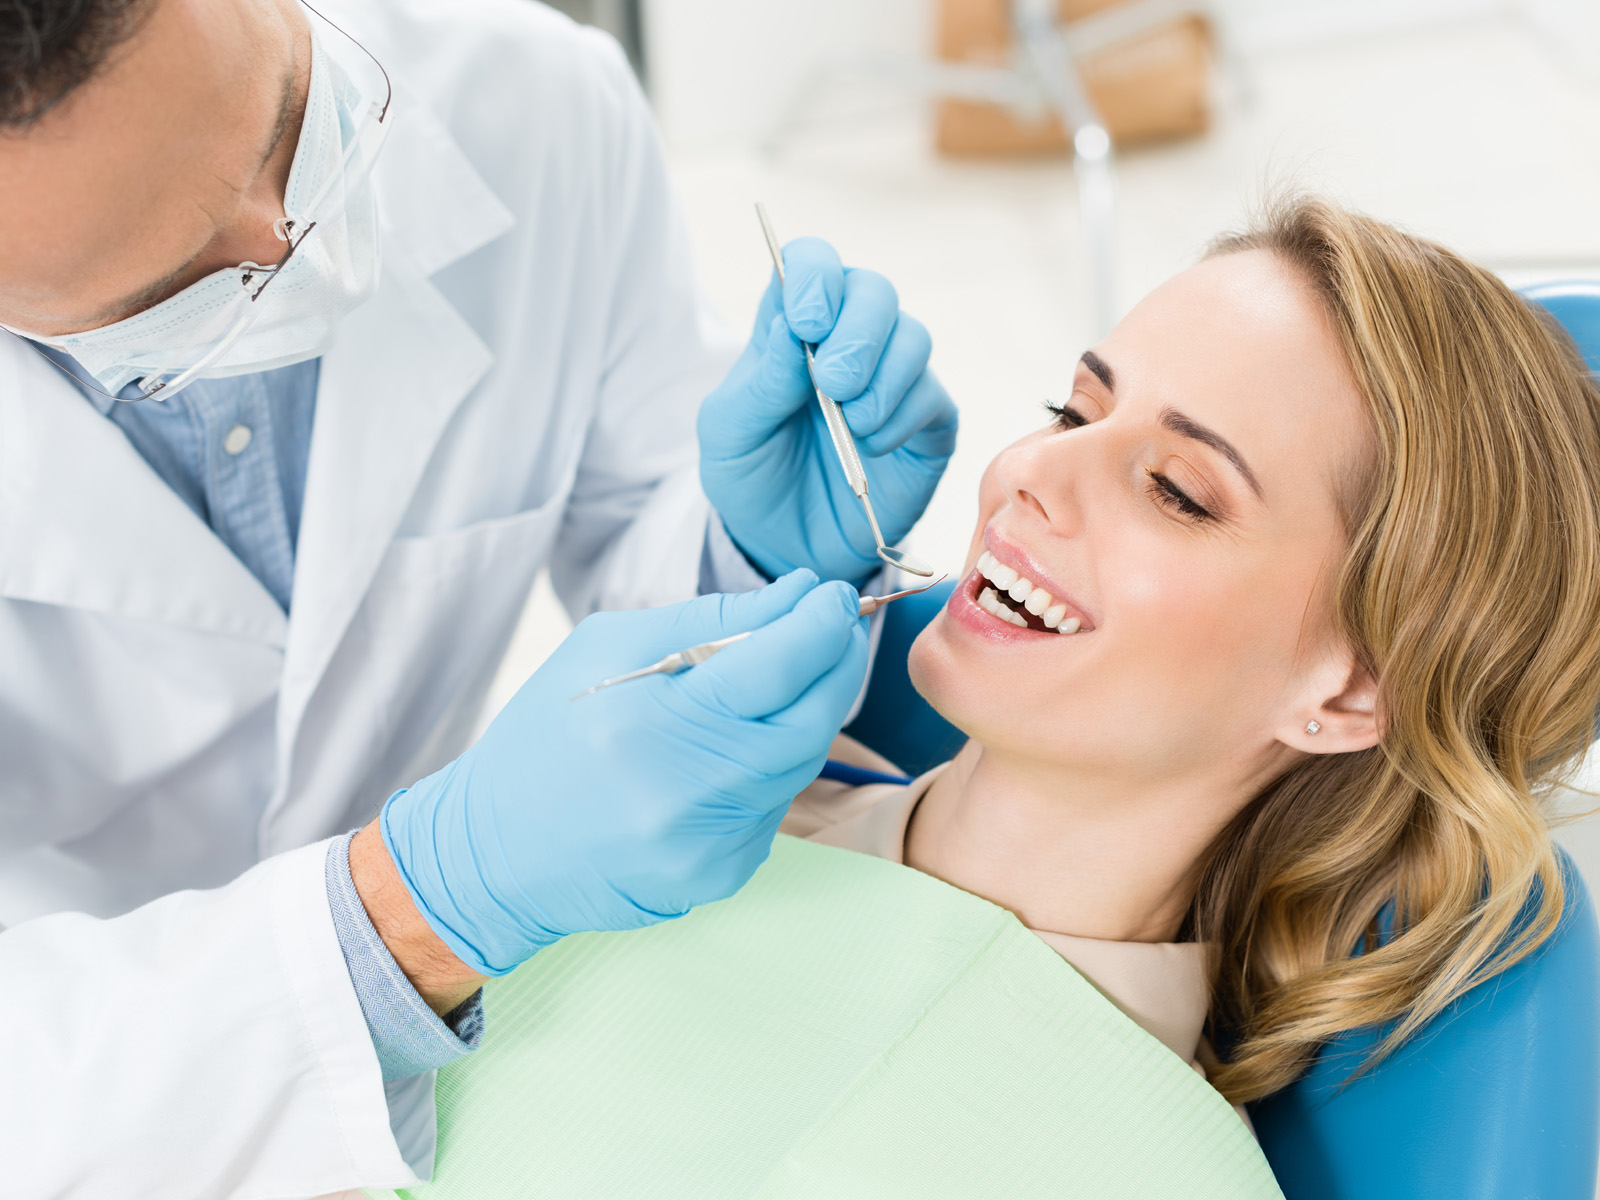 What are symptoms of infection after root canal?